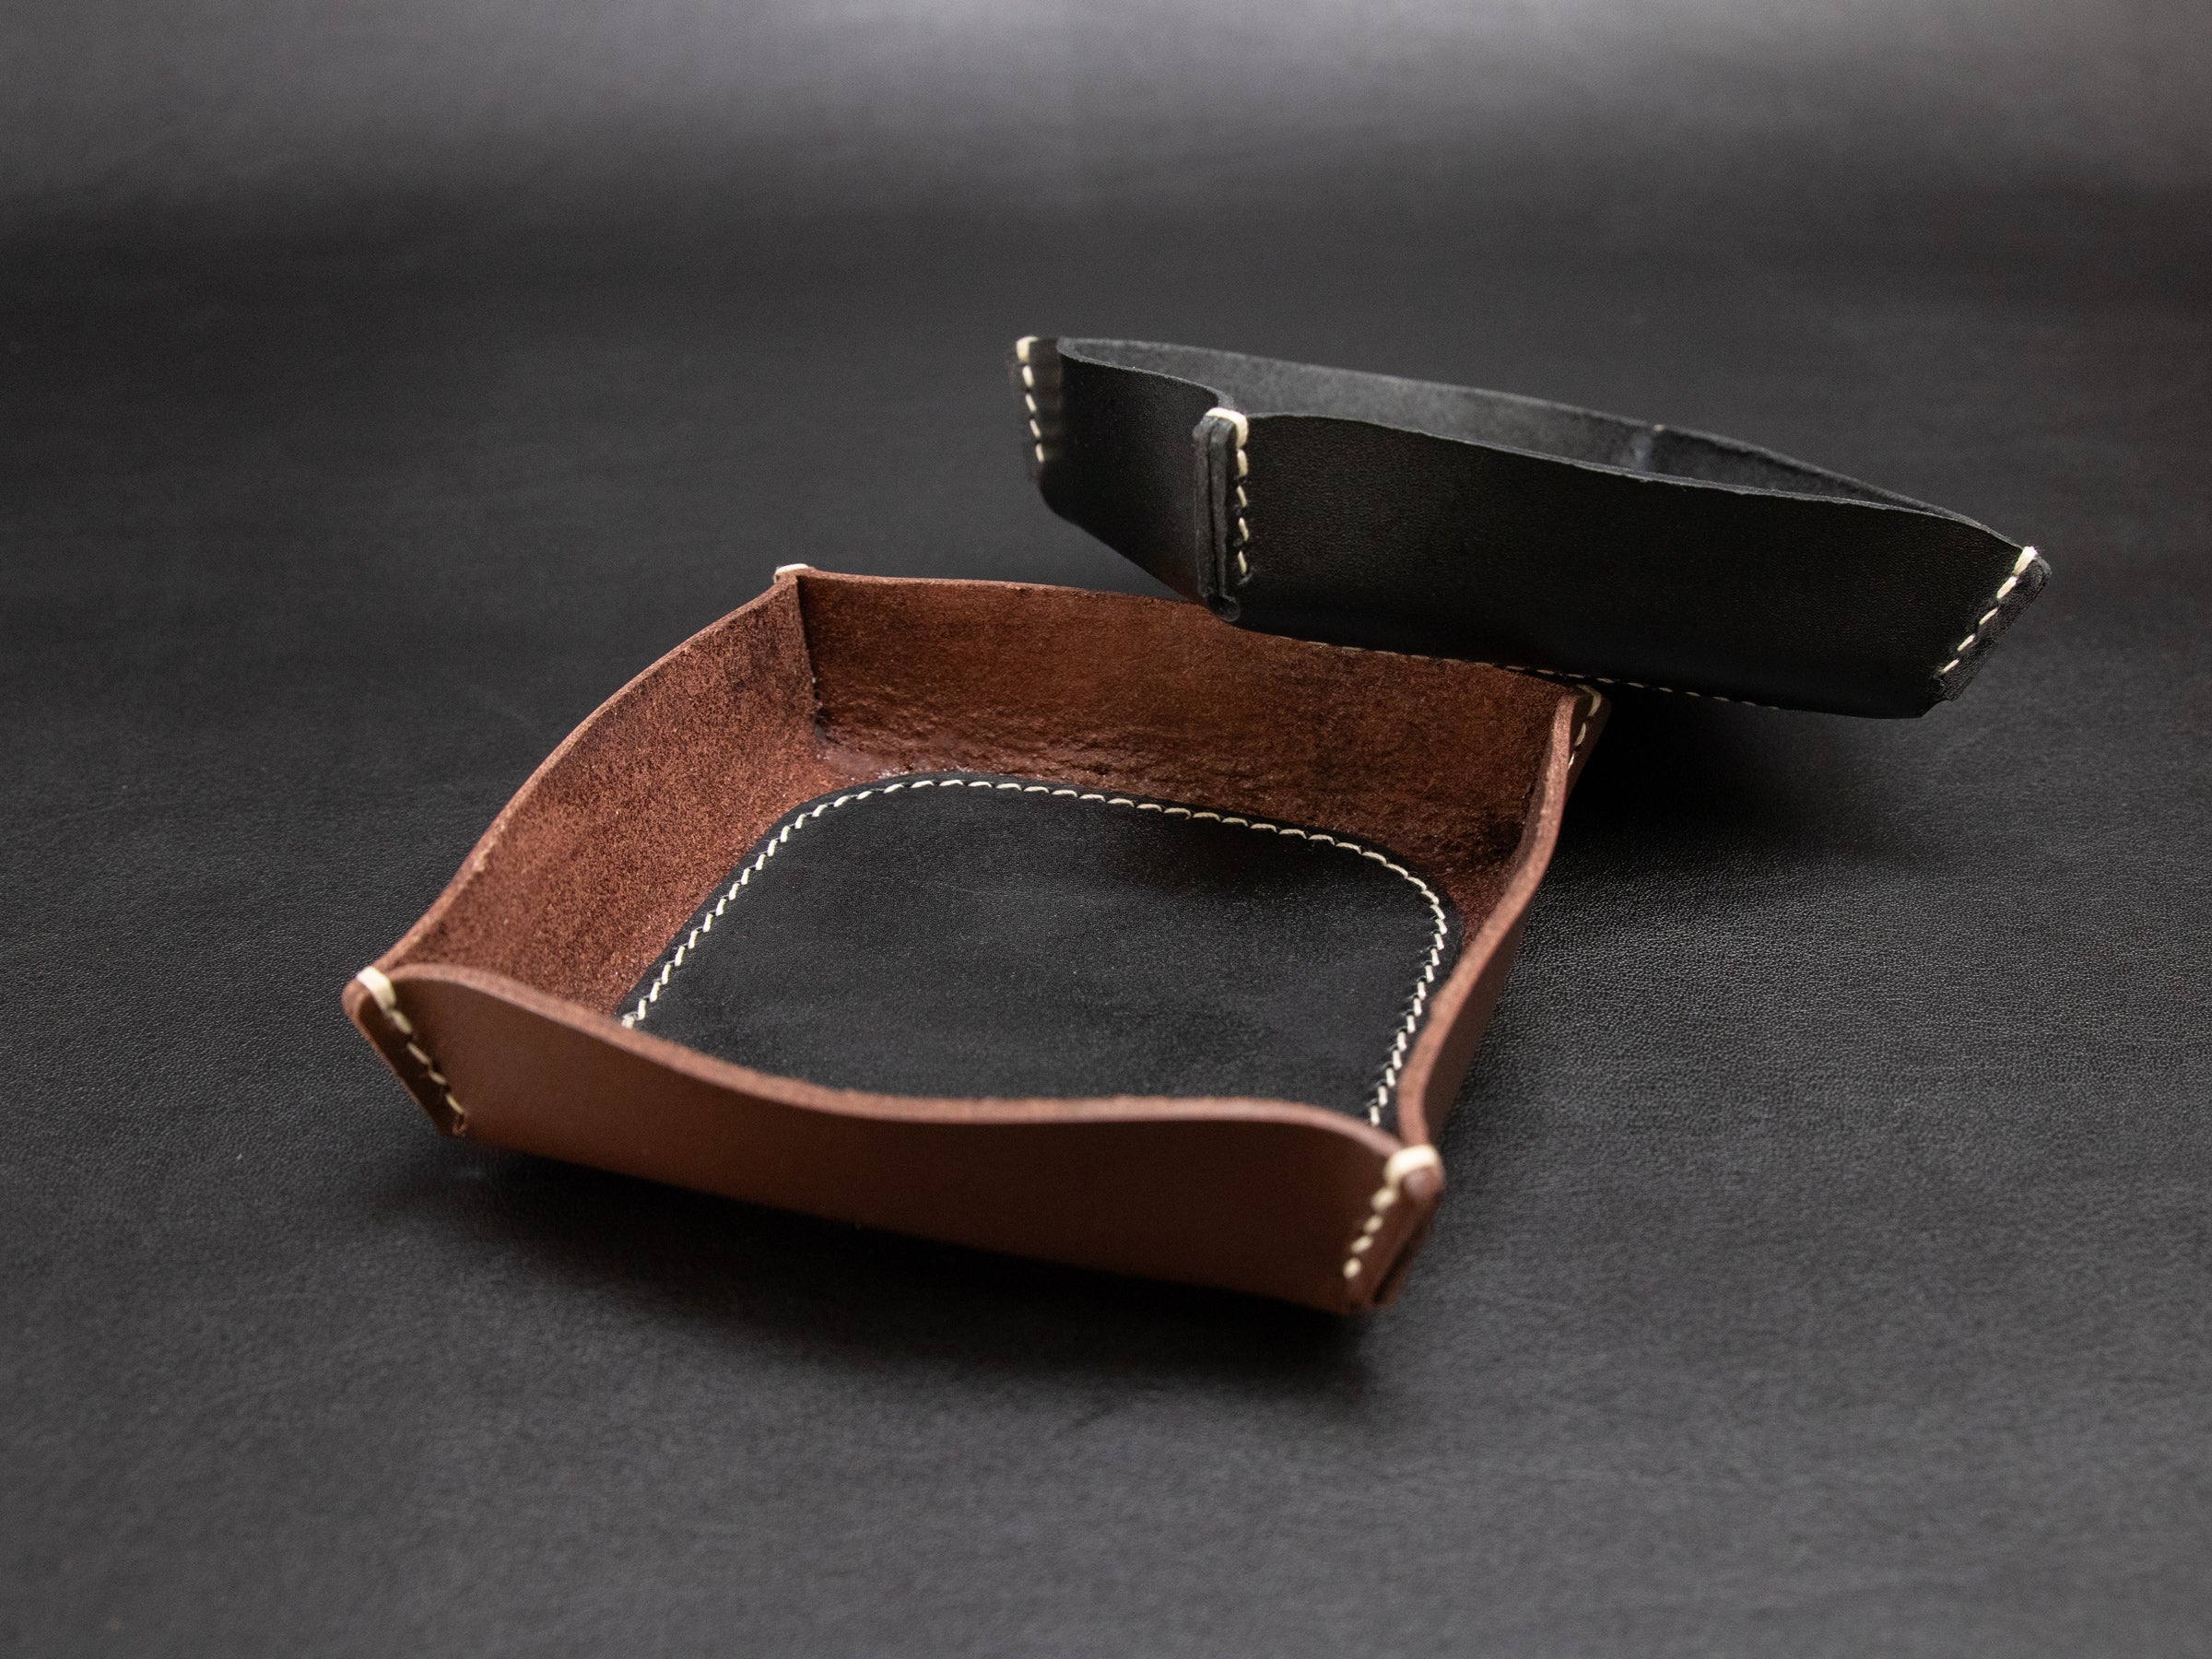 Passionately crafted leather goods embody quality – Leather Brut